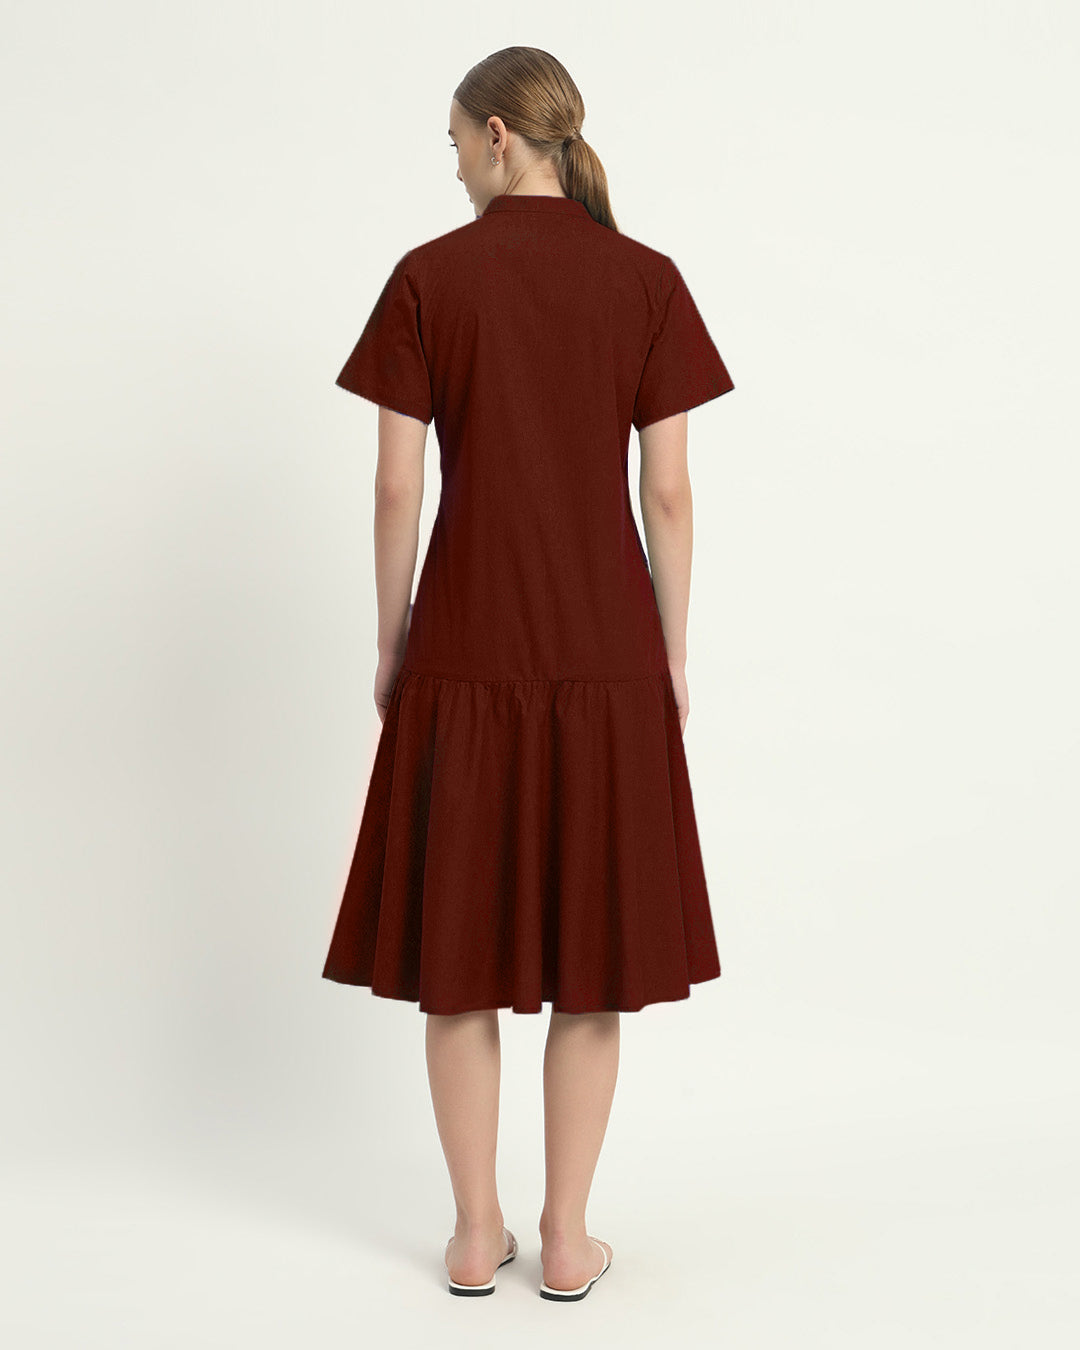 The Rouge Melrose Cotton Dress